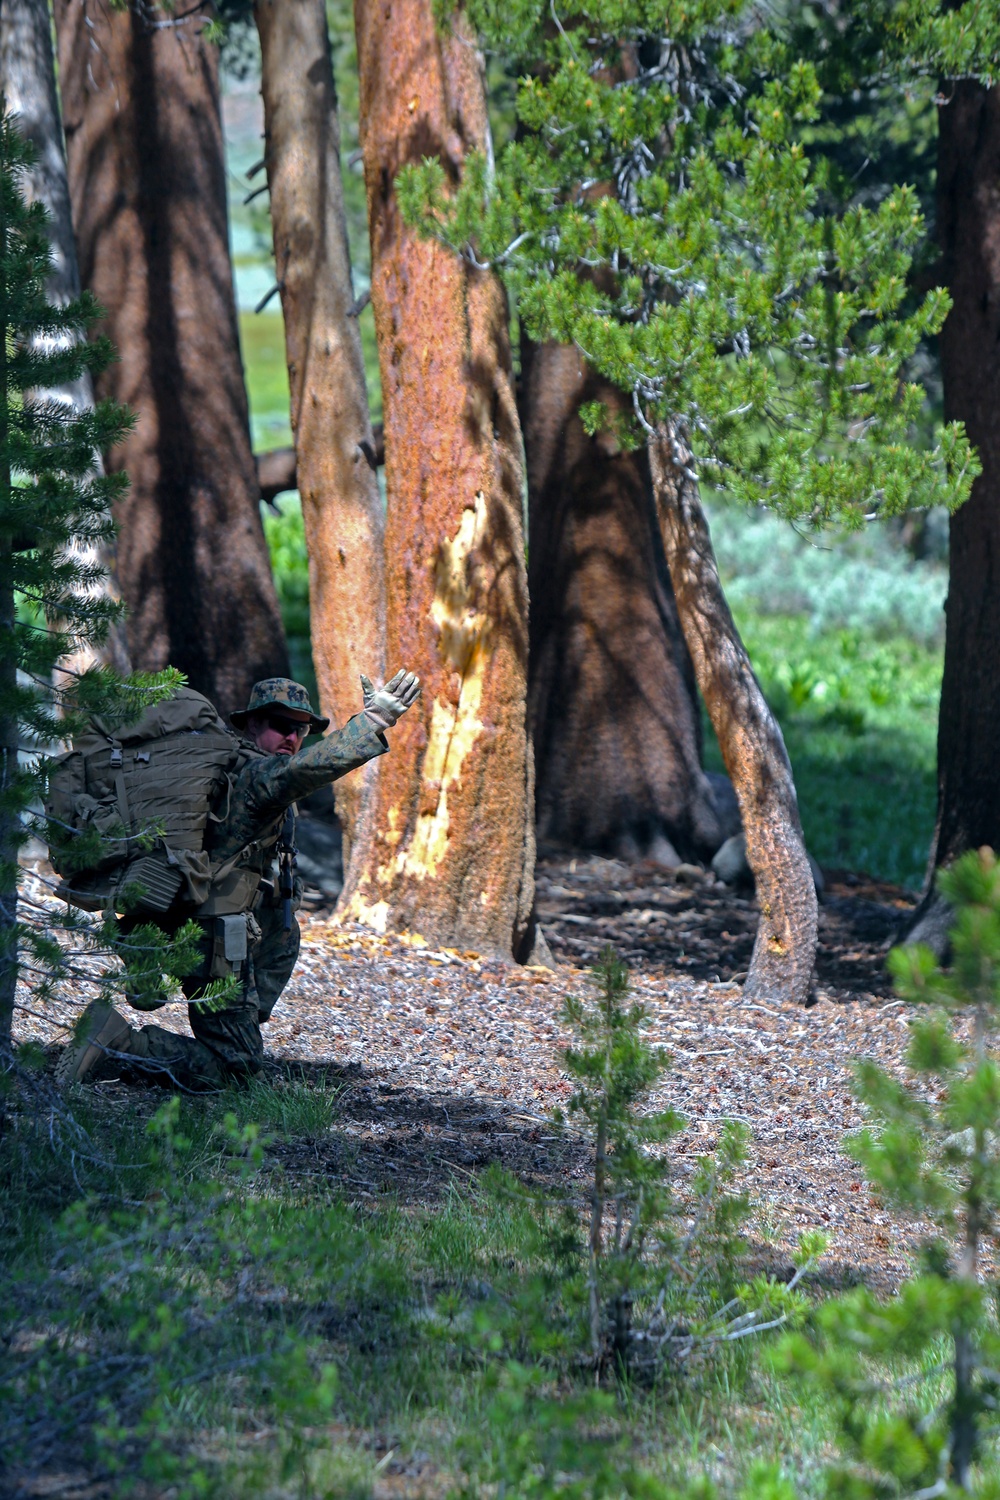 Attacking the Terrain: Second Battalion, Fourth Marines